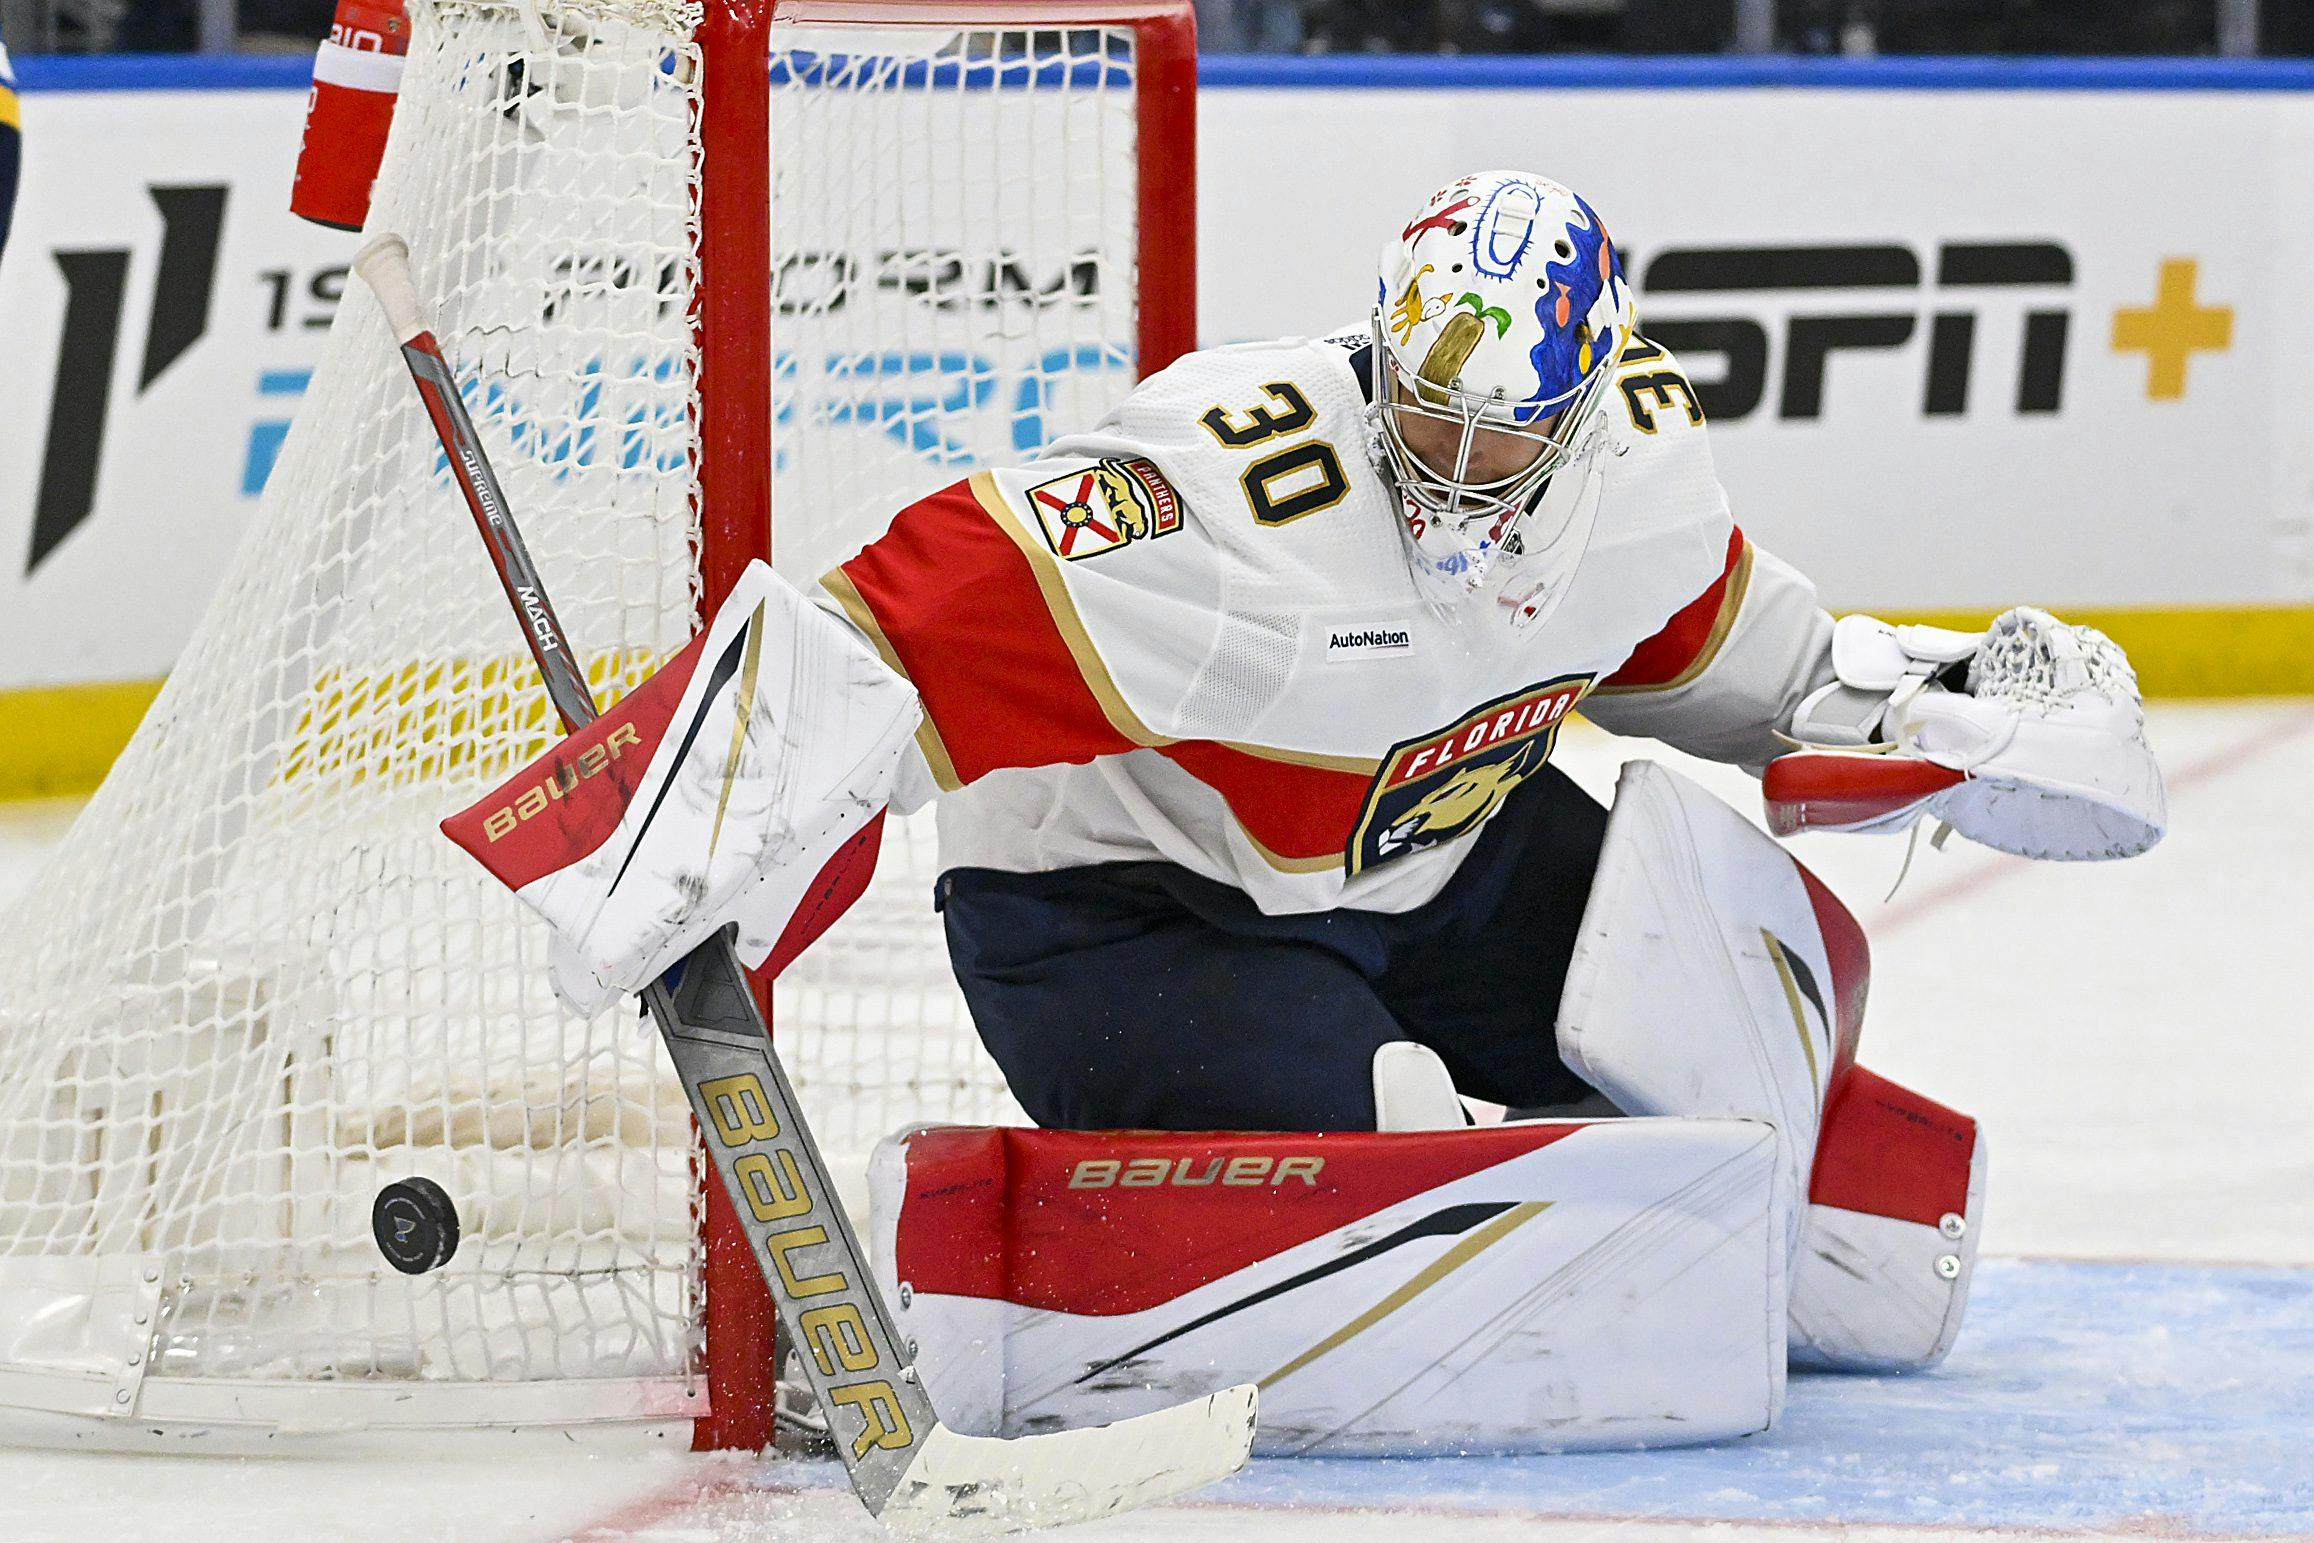 Trip to AHL could be huge for Florida Panthers’ Spencer Knight